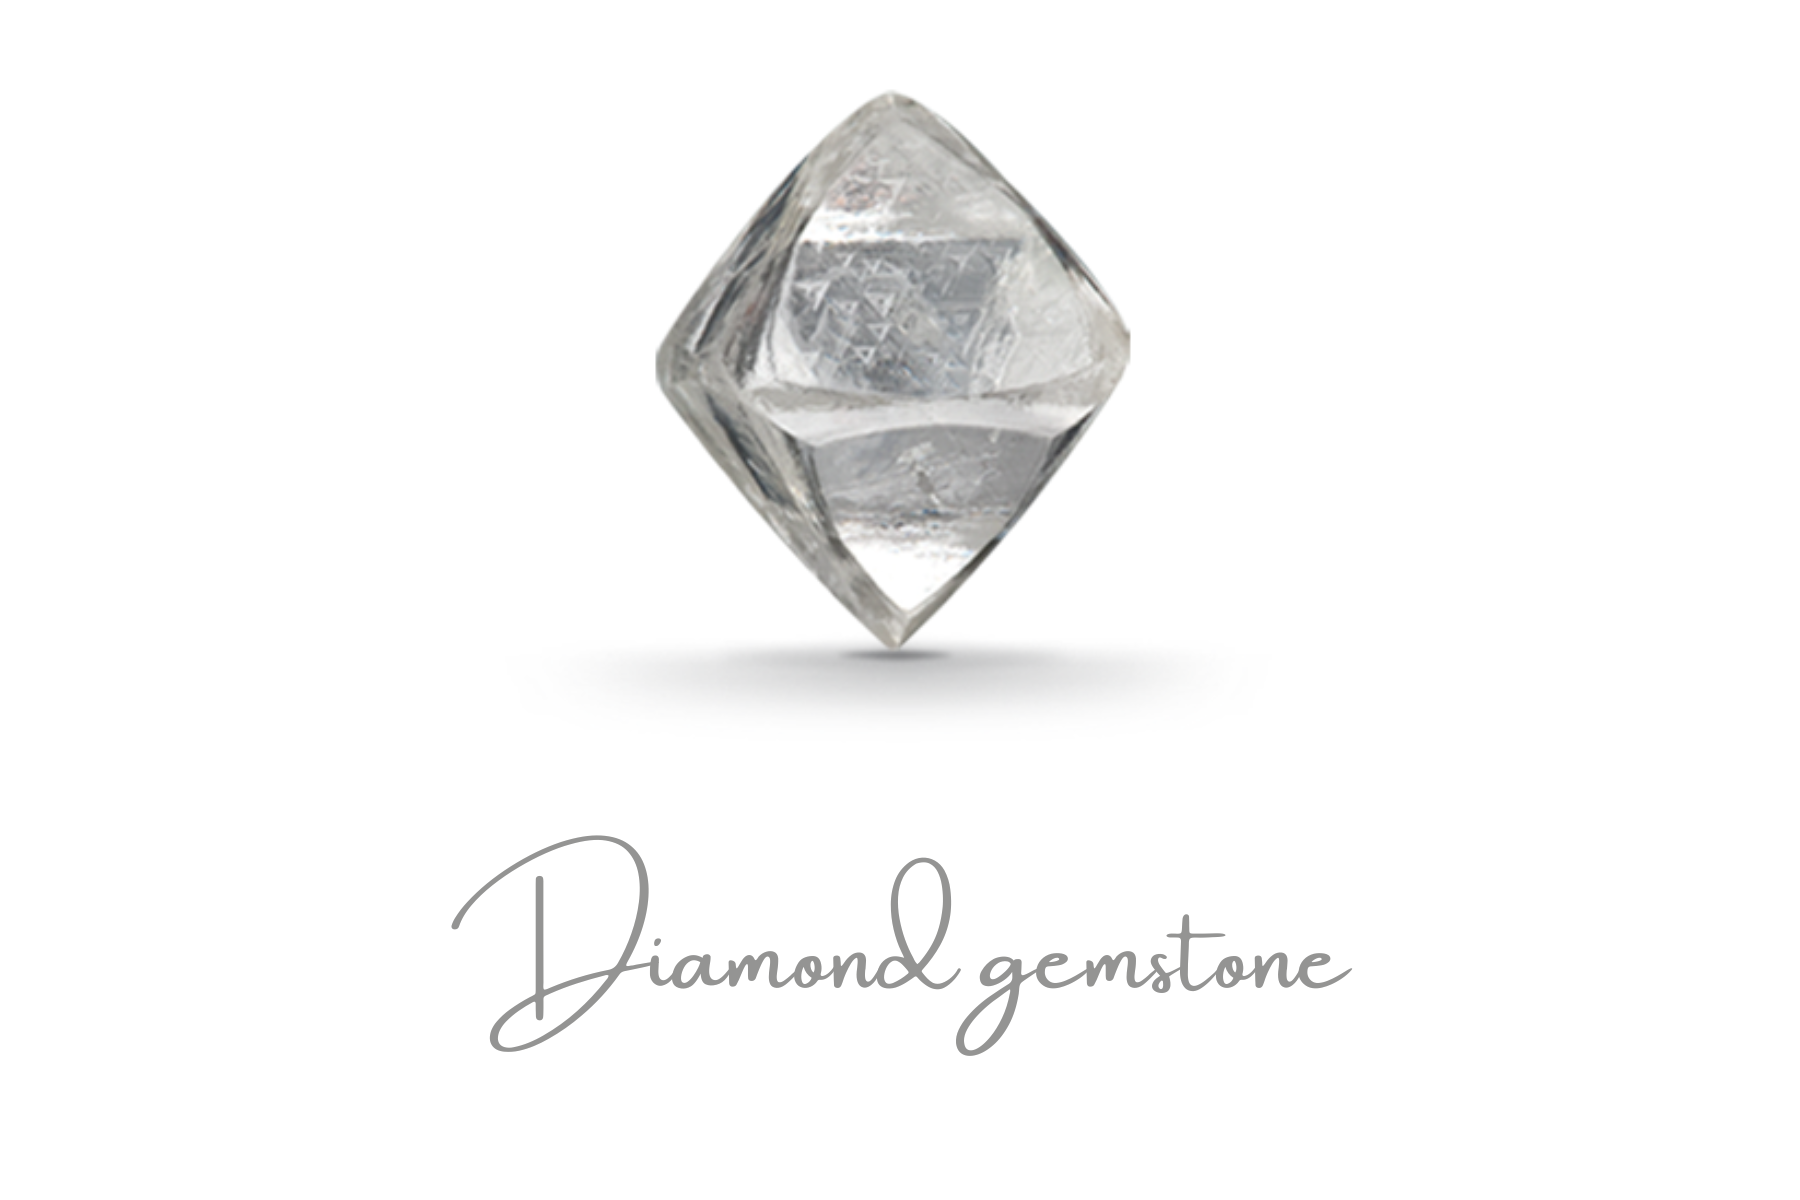 Double triangle-shaped colorless diamond stone